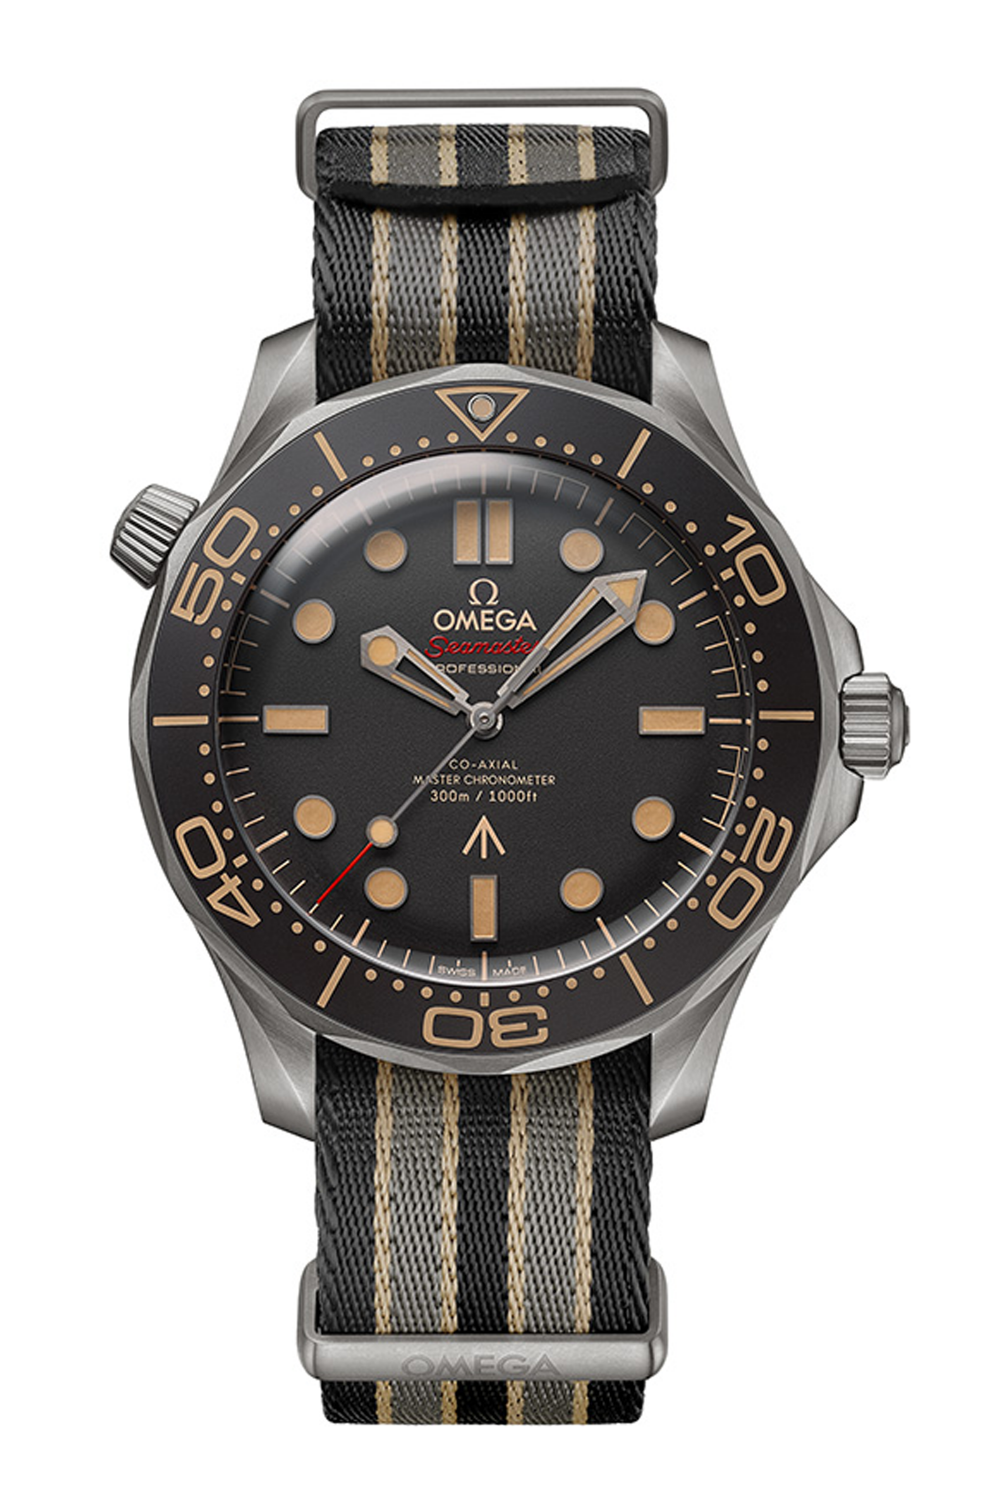 OMEGA 007 Edition Seamaster Diver 300M OMEGA Co-Axial Master Chronometer 42MM 210.92.42.20.01.001